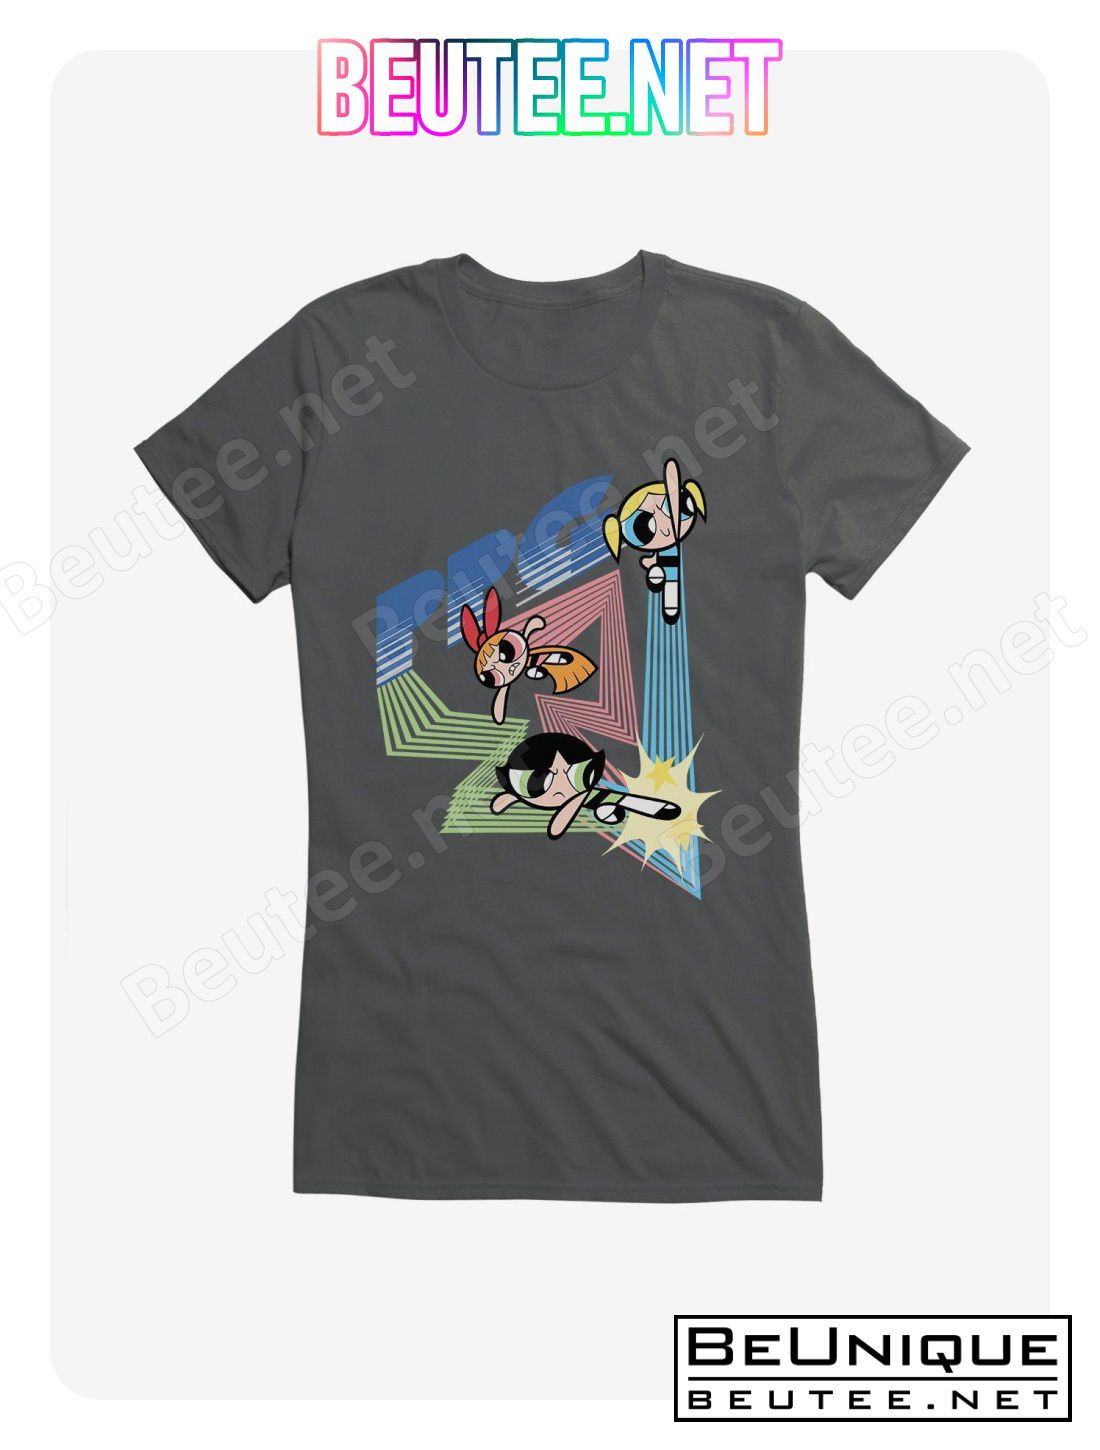 The Powerpuff Girls Ppg Action Pose T-Shirt